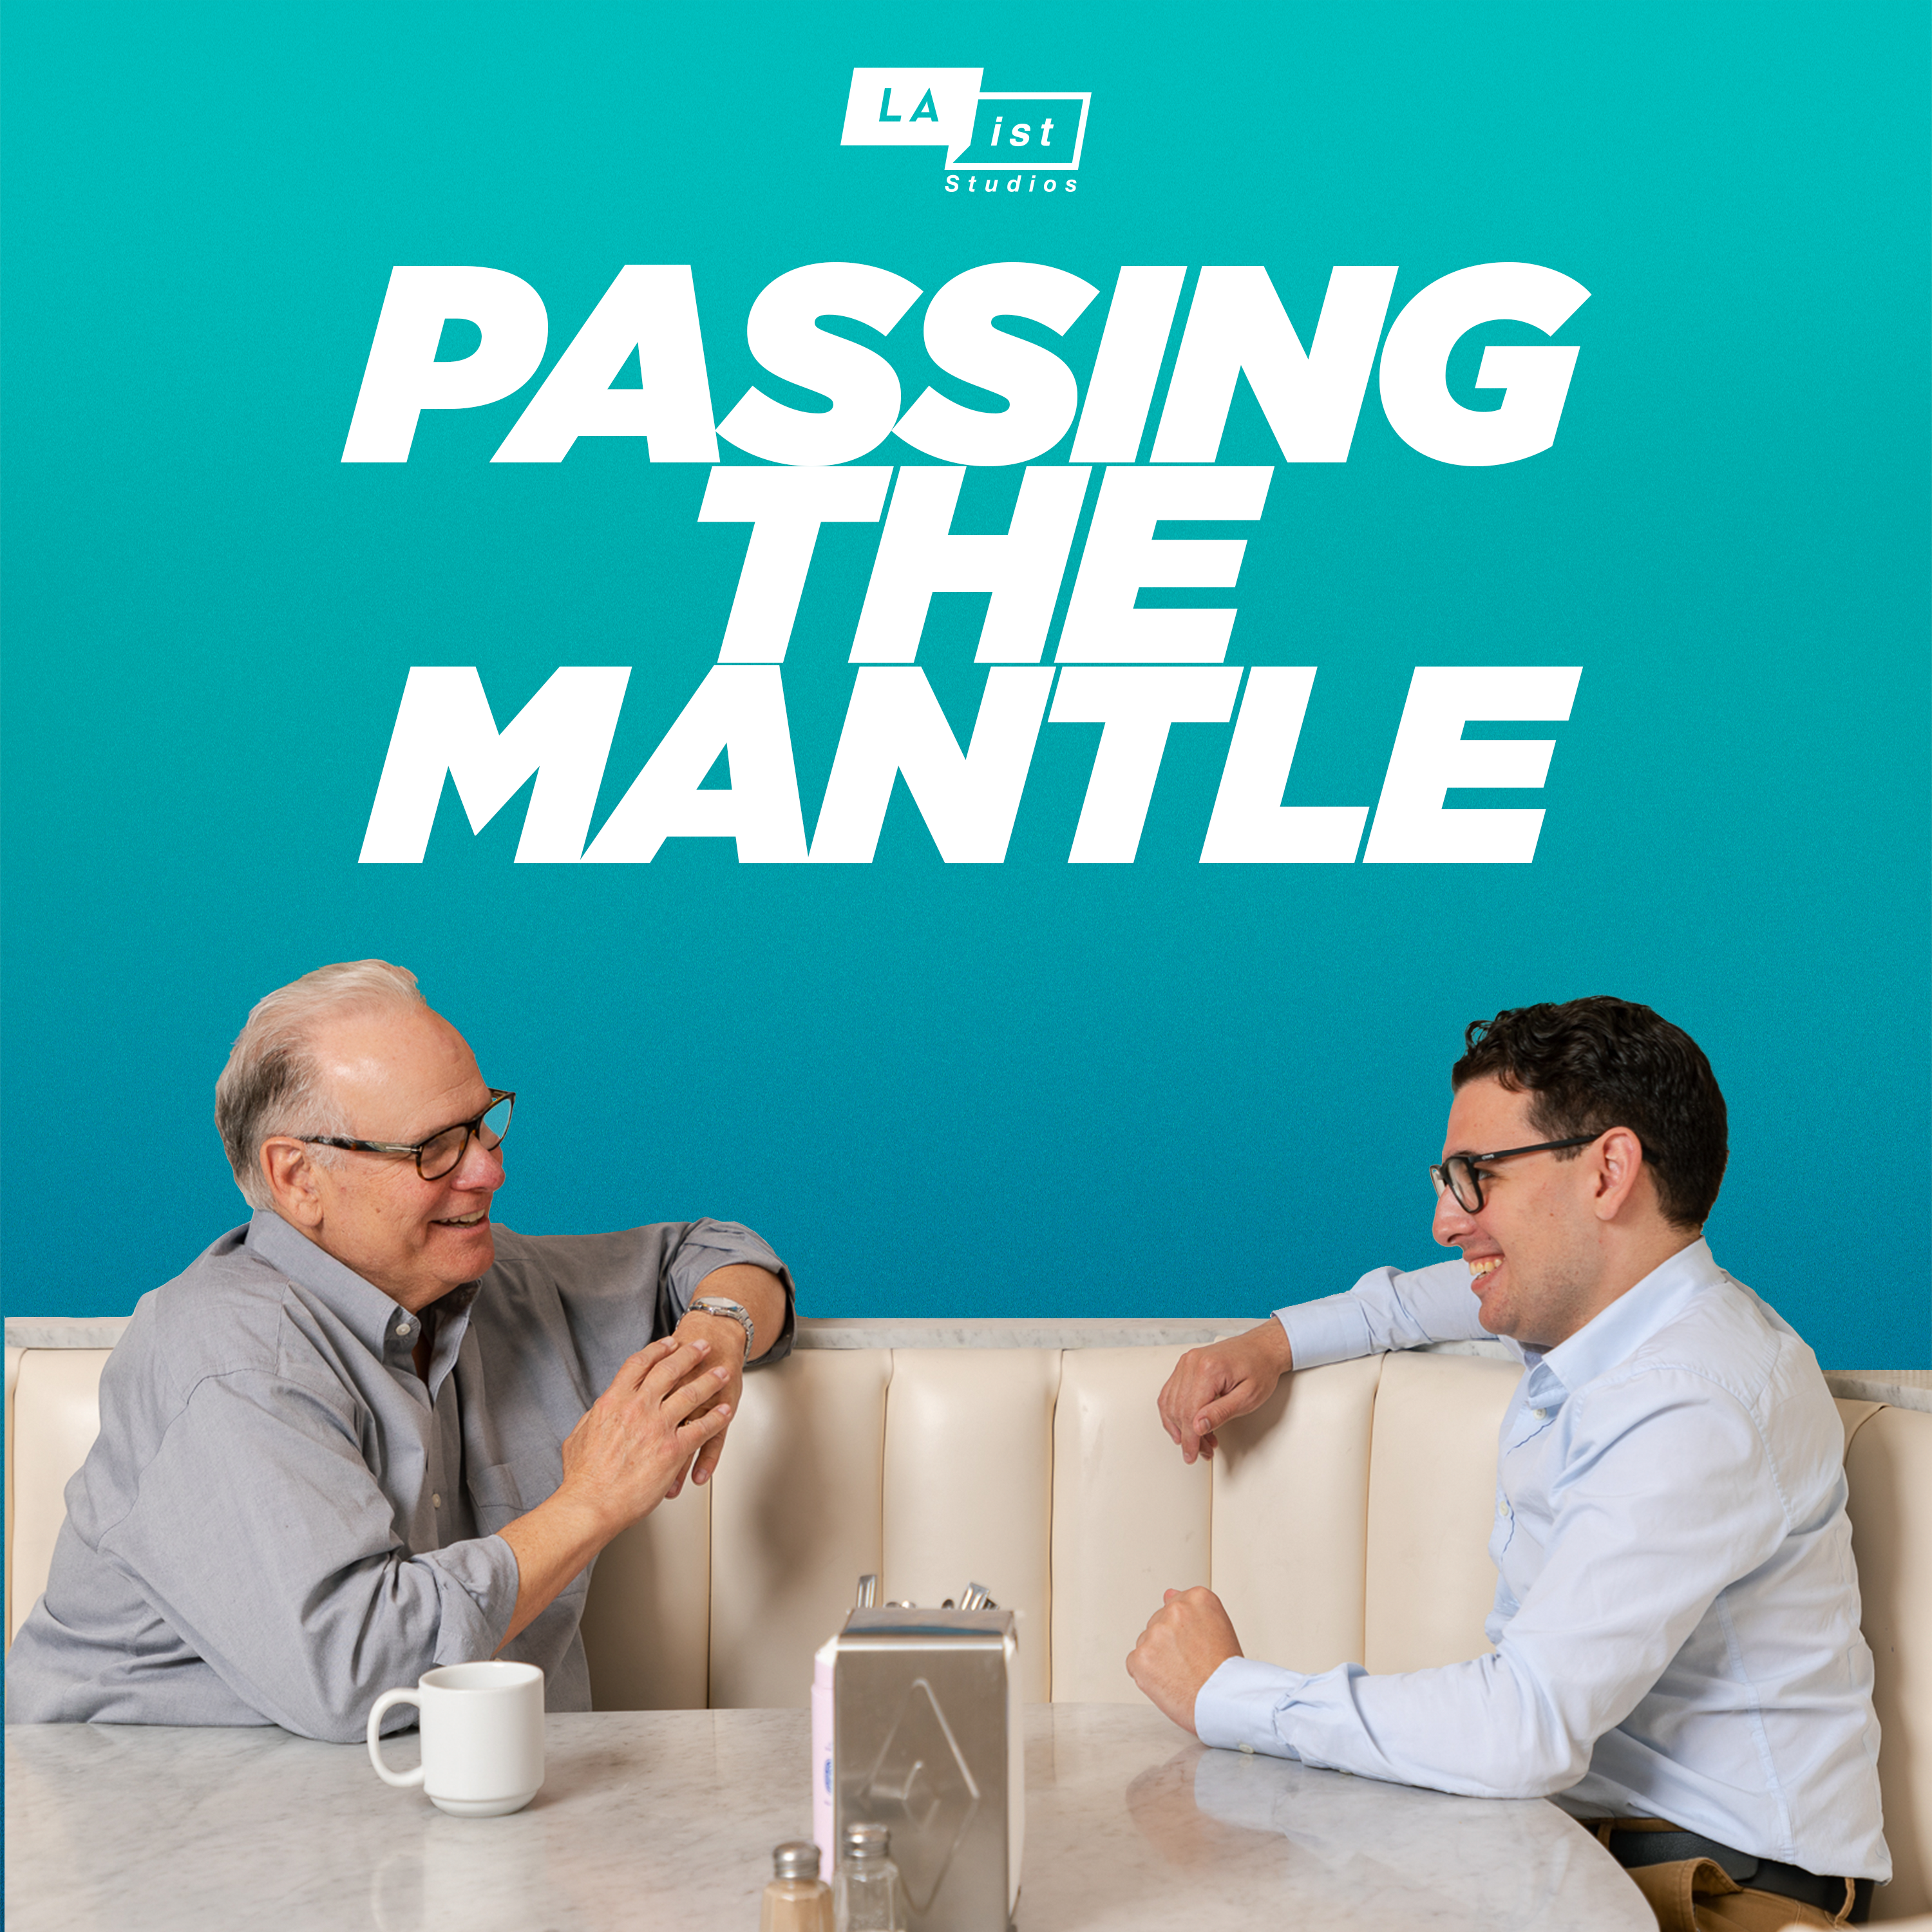 LAist Studios presents Passing The Mantle: How attitudes toward mental health have shifted since the 70s